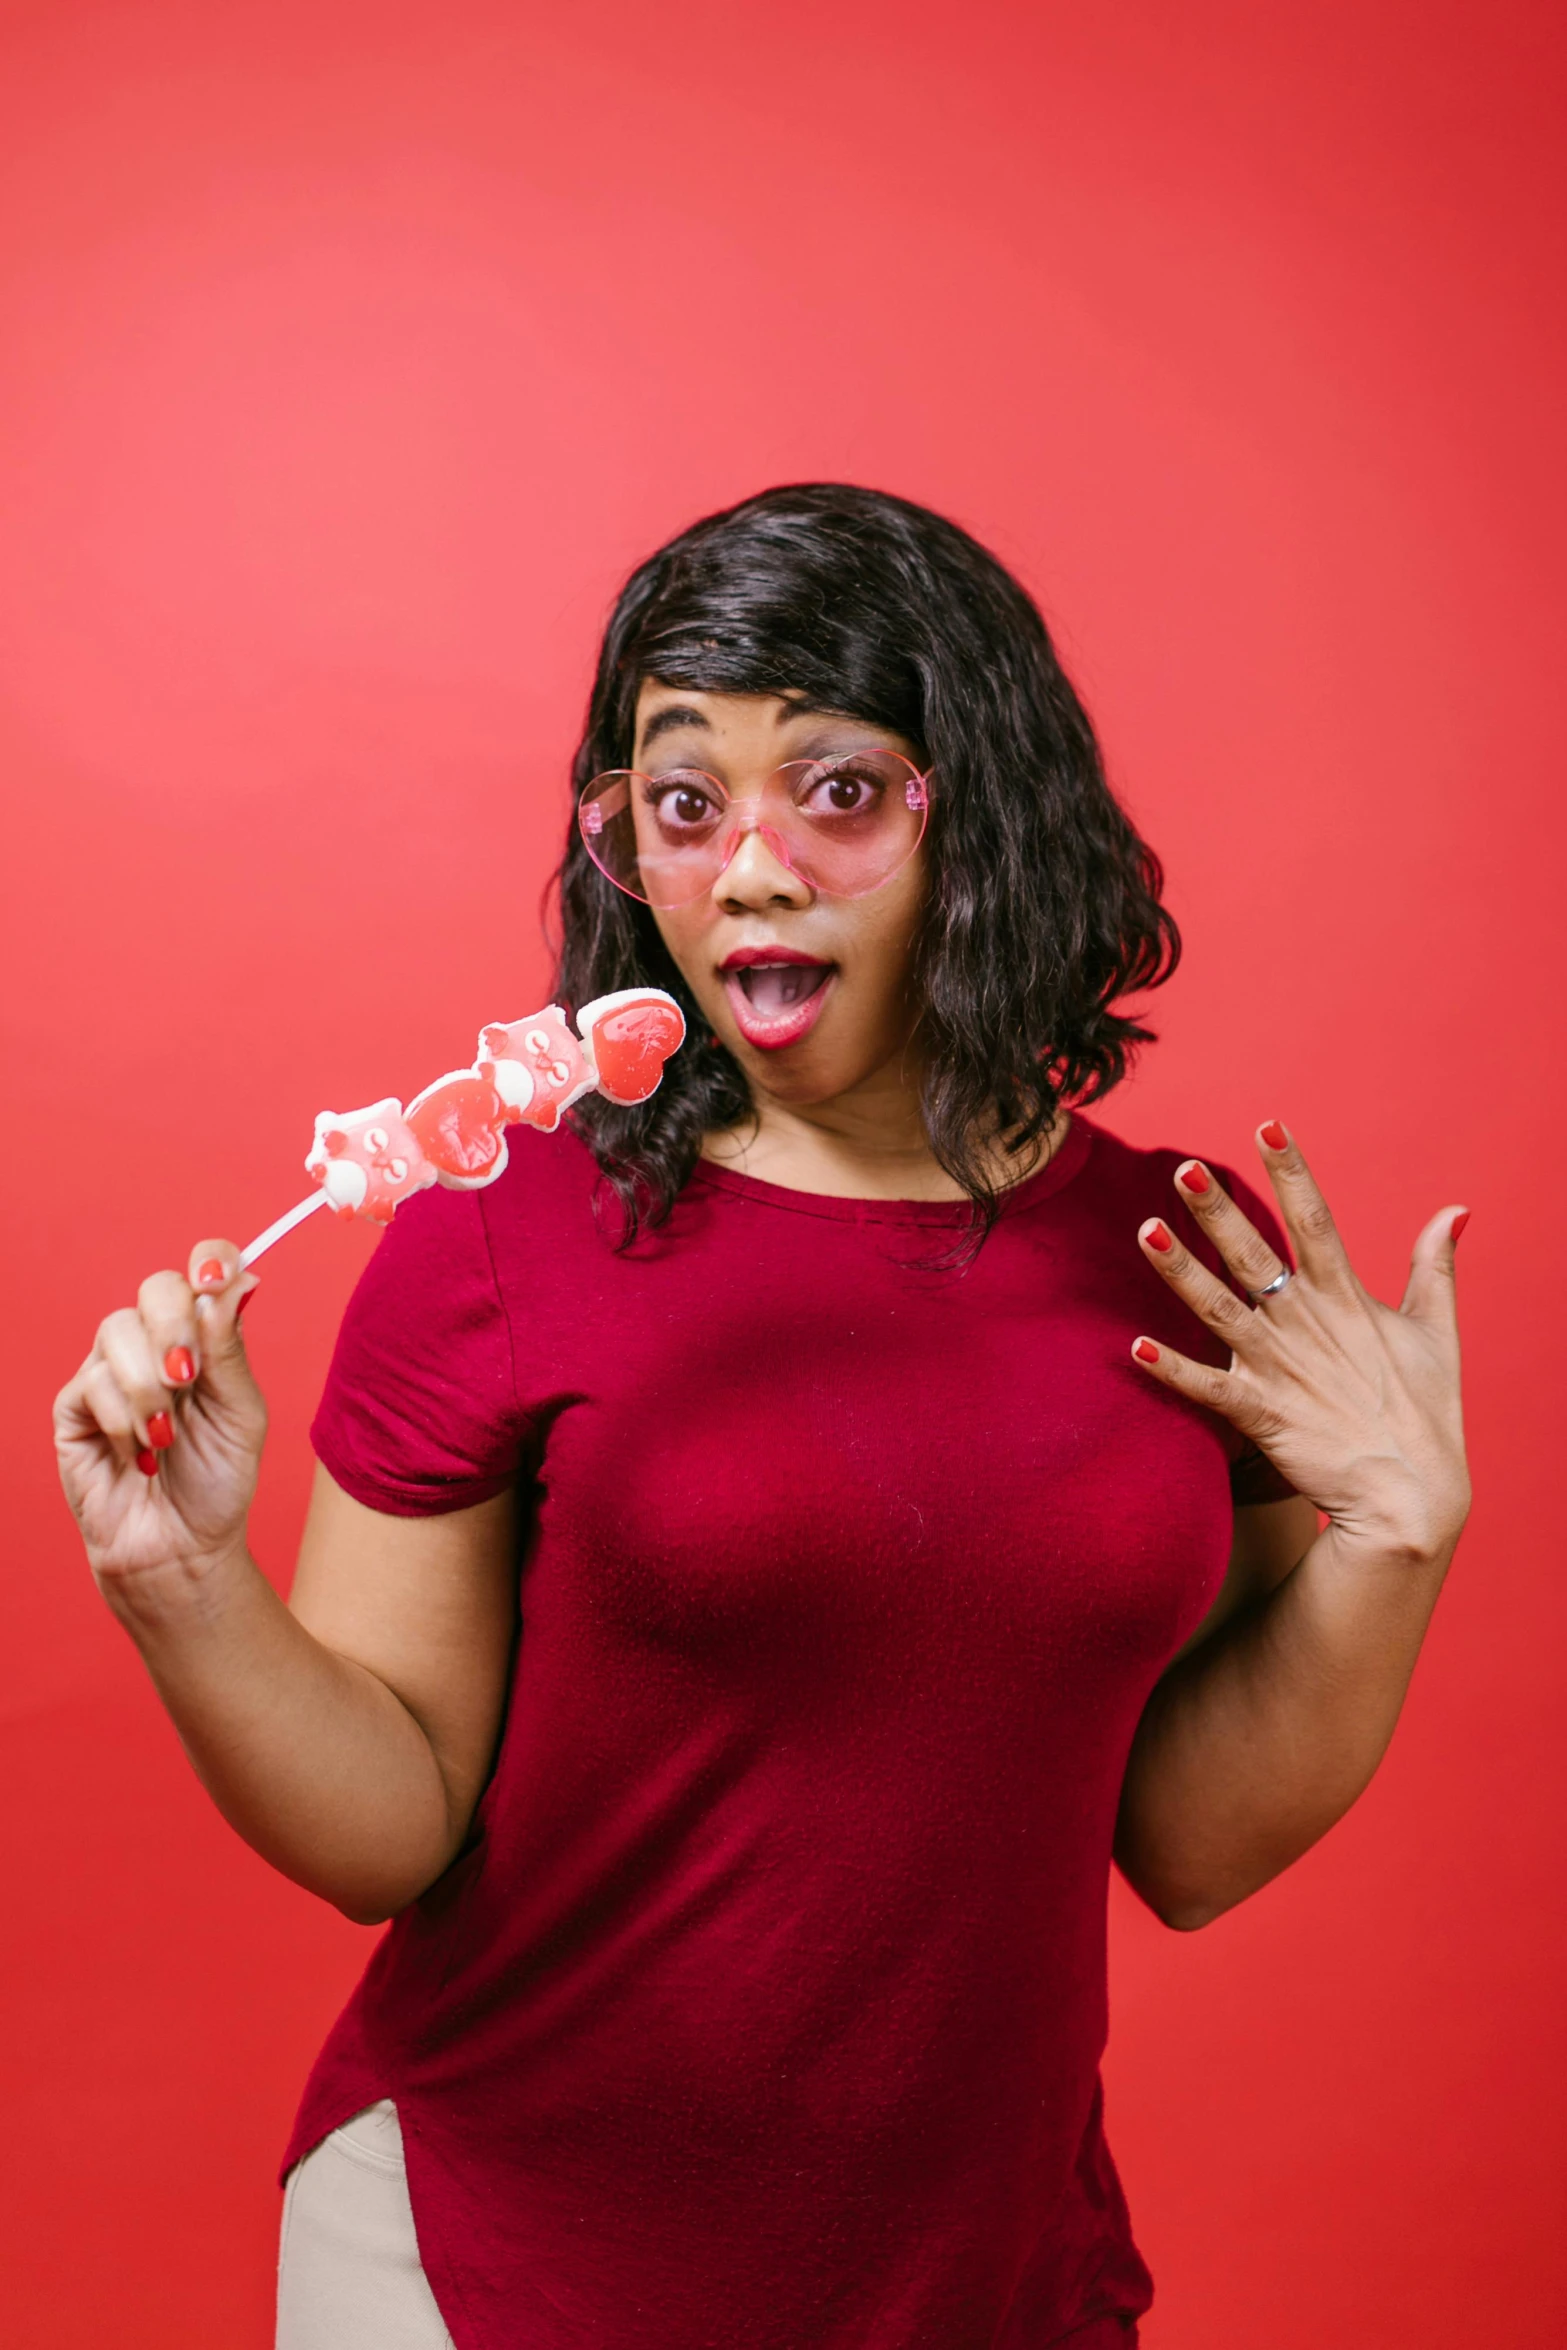 a woman in a red shirt holding two lollipop lollipop lollipop lollipop lollipop lollipop lolli, an album cover, shutterstock contest winner, aida muluneh, dungeons and dragons character, silly playful fun face, in an action pose